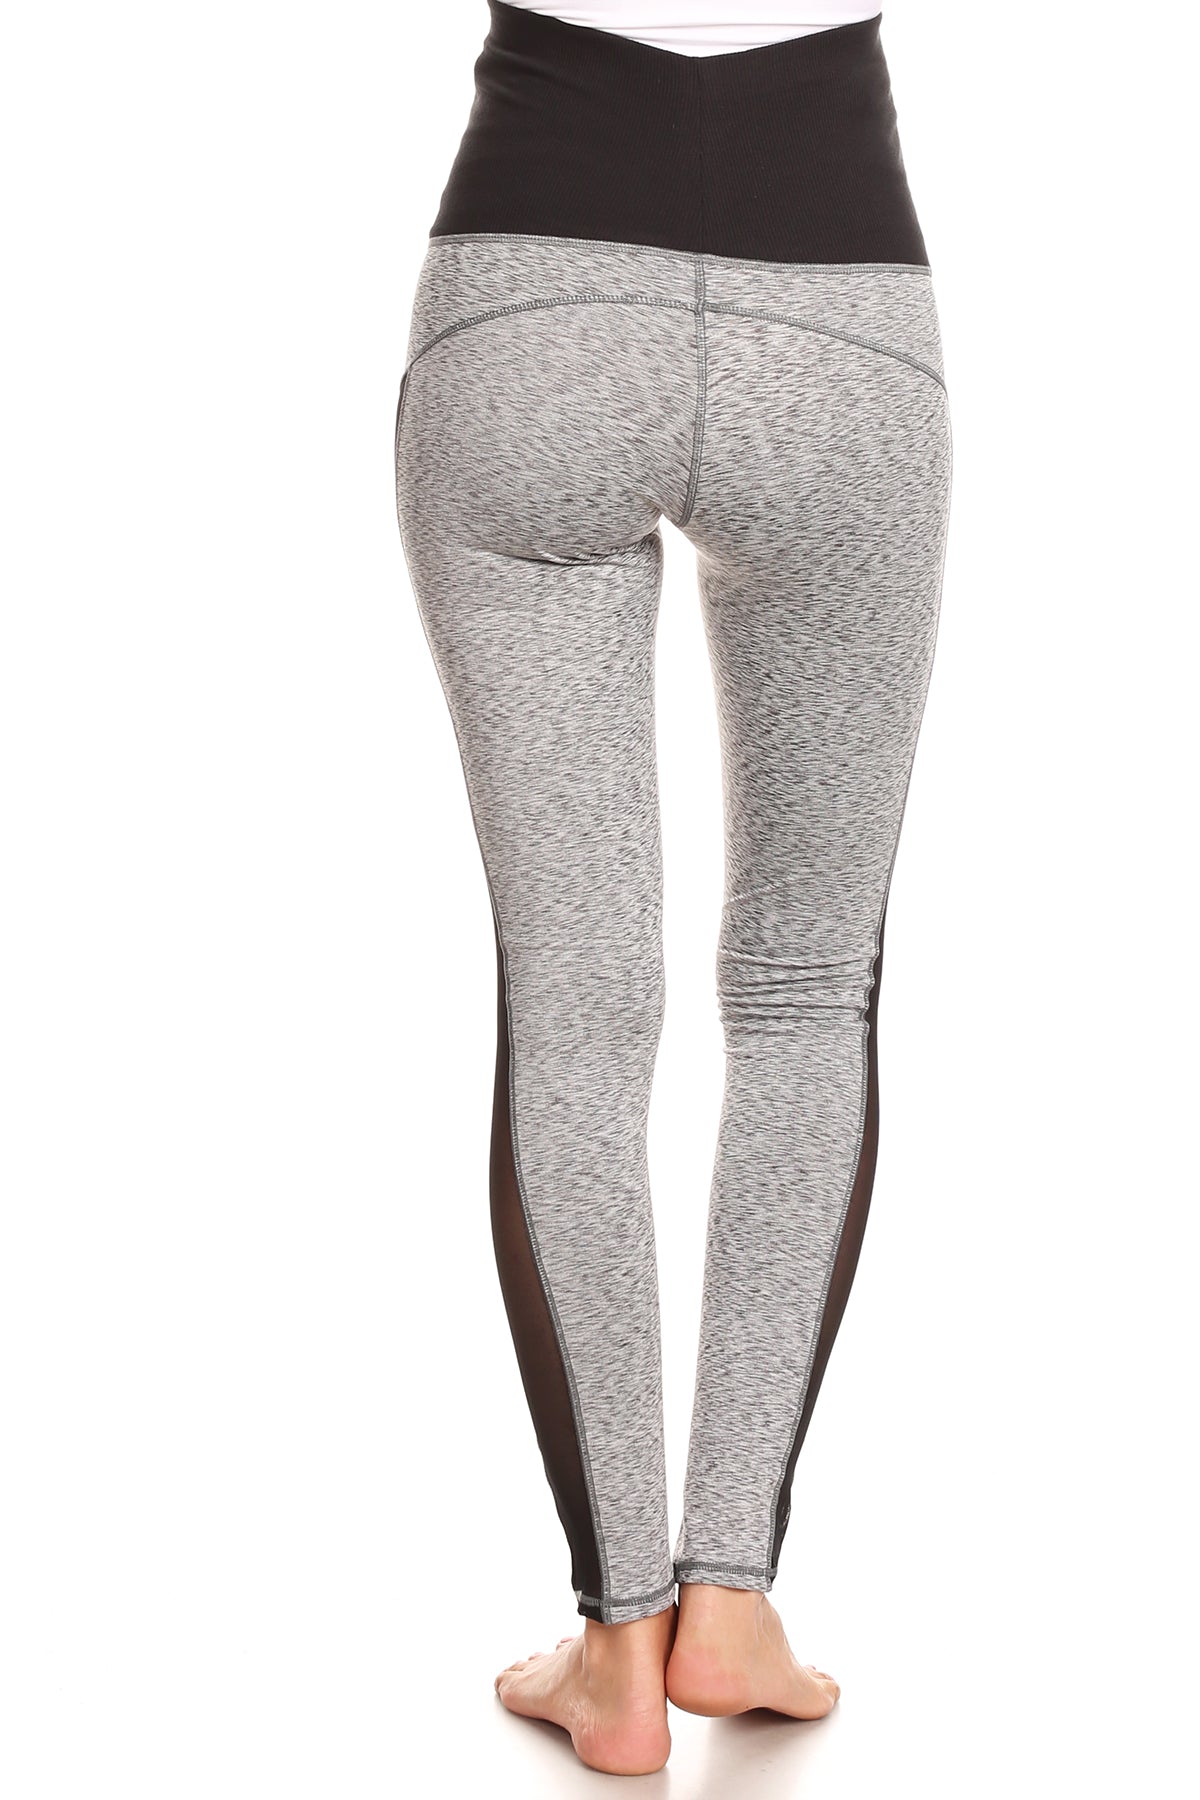 Buy Lux Lyra Ankle Length Legging L37 Steel Grey Free Size Online at Low  Prices in India at Bigdeals24x7.com